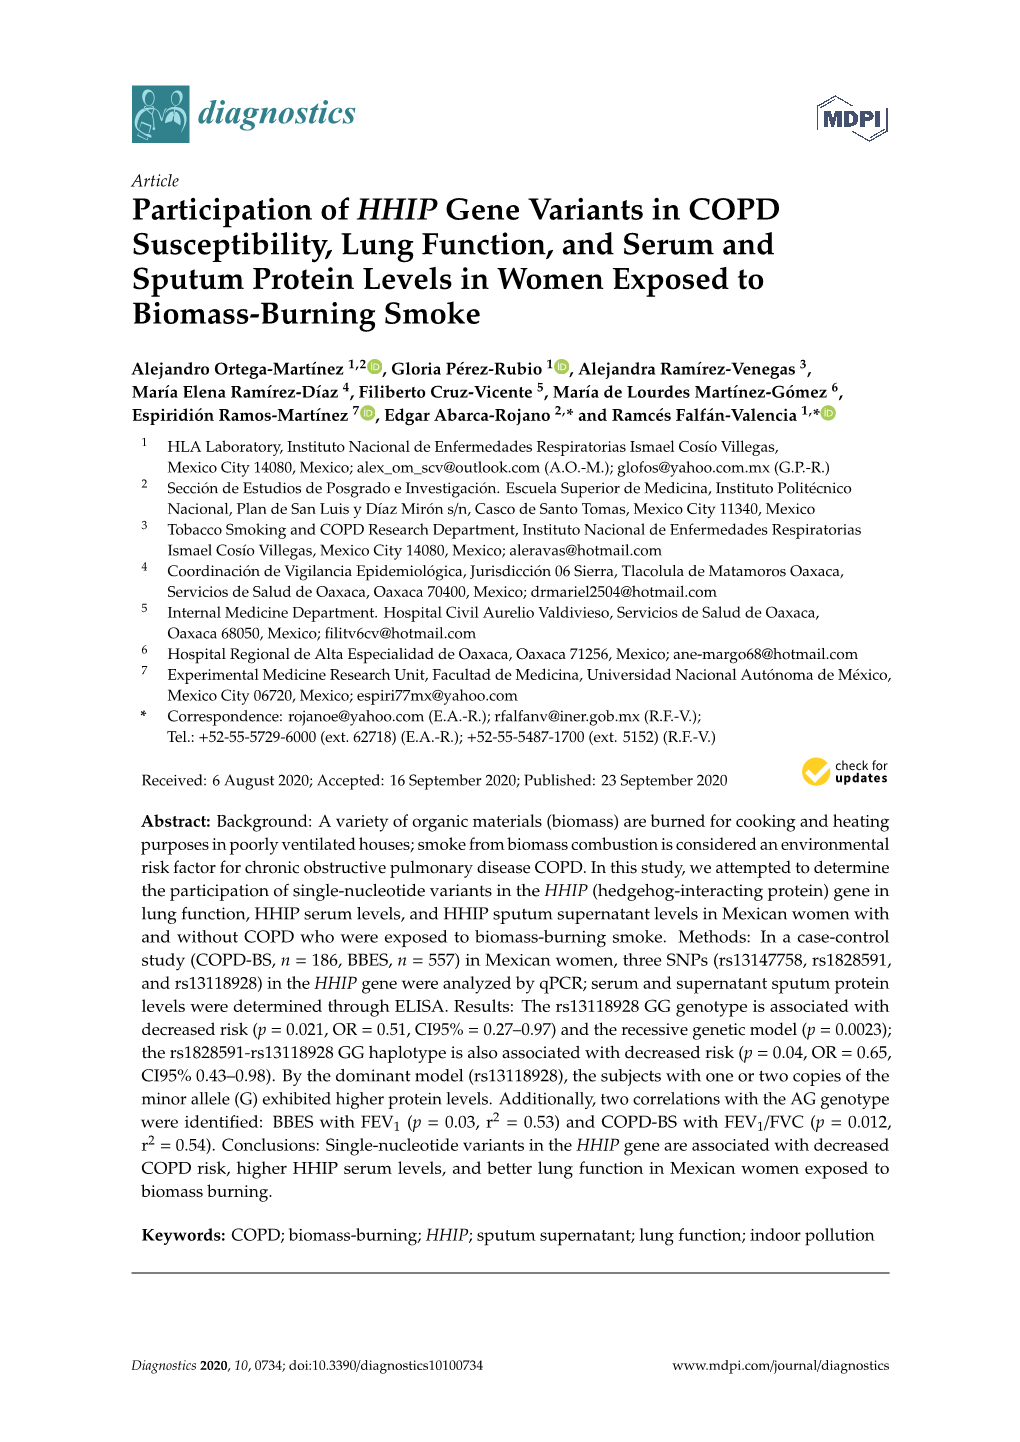 Participation of HHIP Gene Variants in COPD Susceptibility, Lung Function, and Serum and Sputum Protein Levels in Women Exposed to Biomass-Burning Smoke